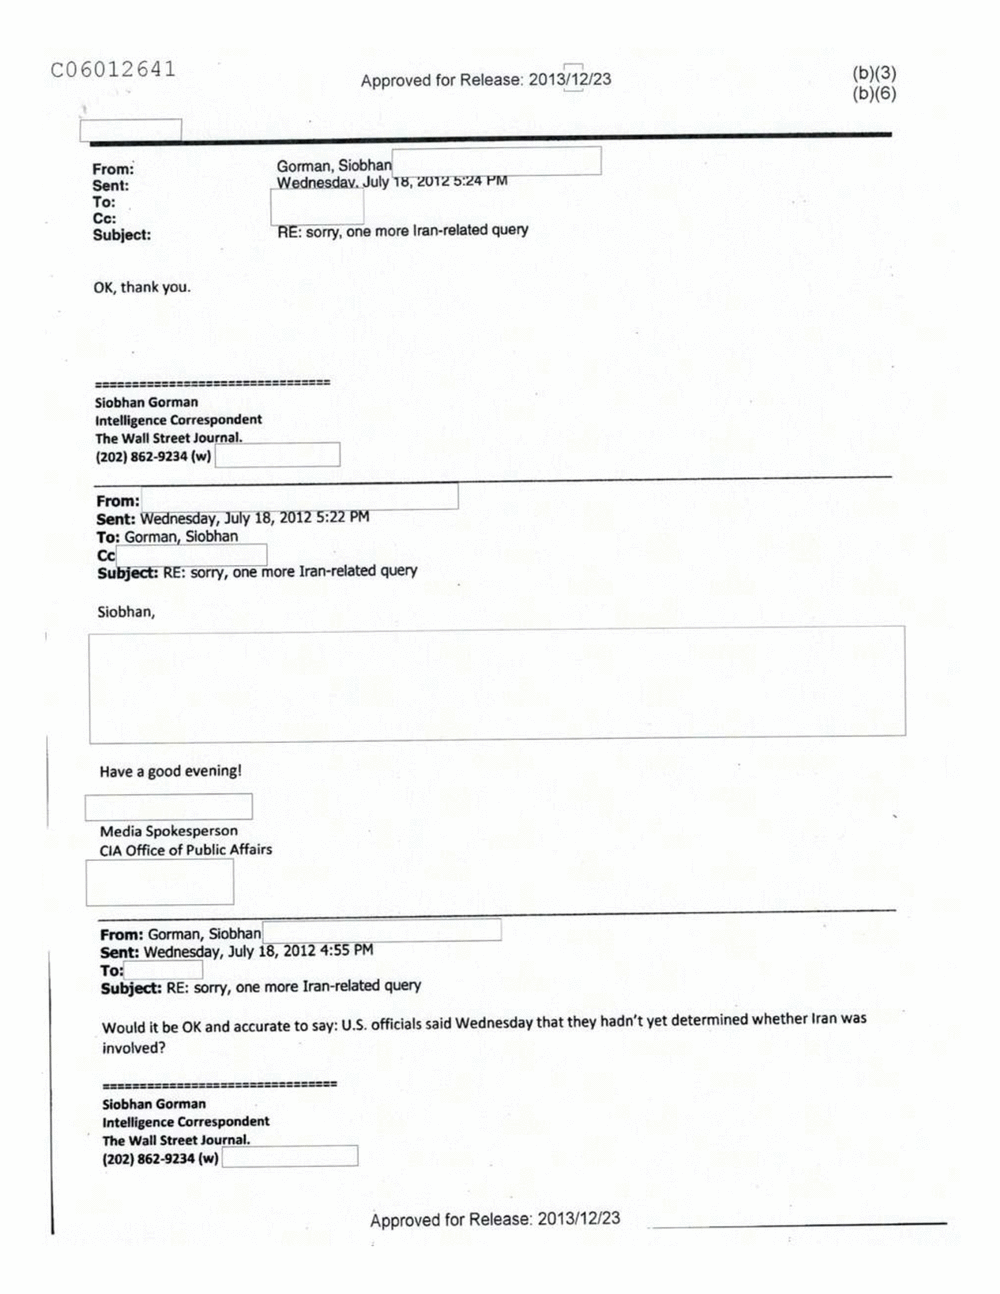 Page 207 from Email Correspondence Between Reporters and CIA Flacks